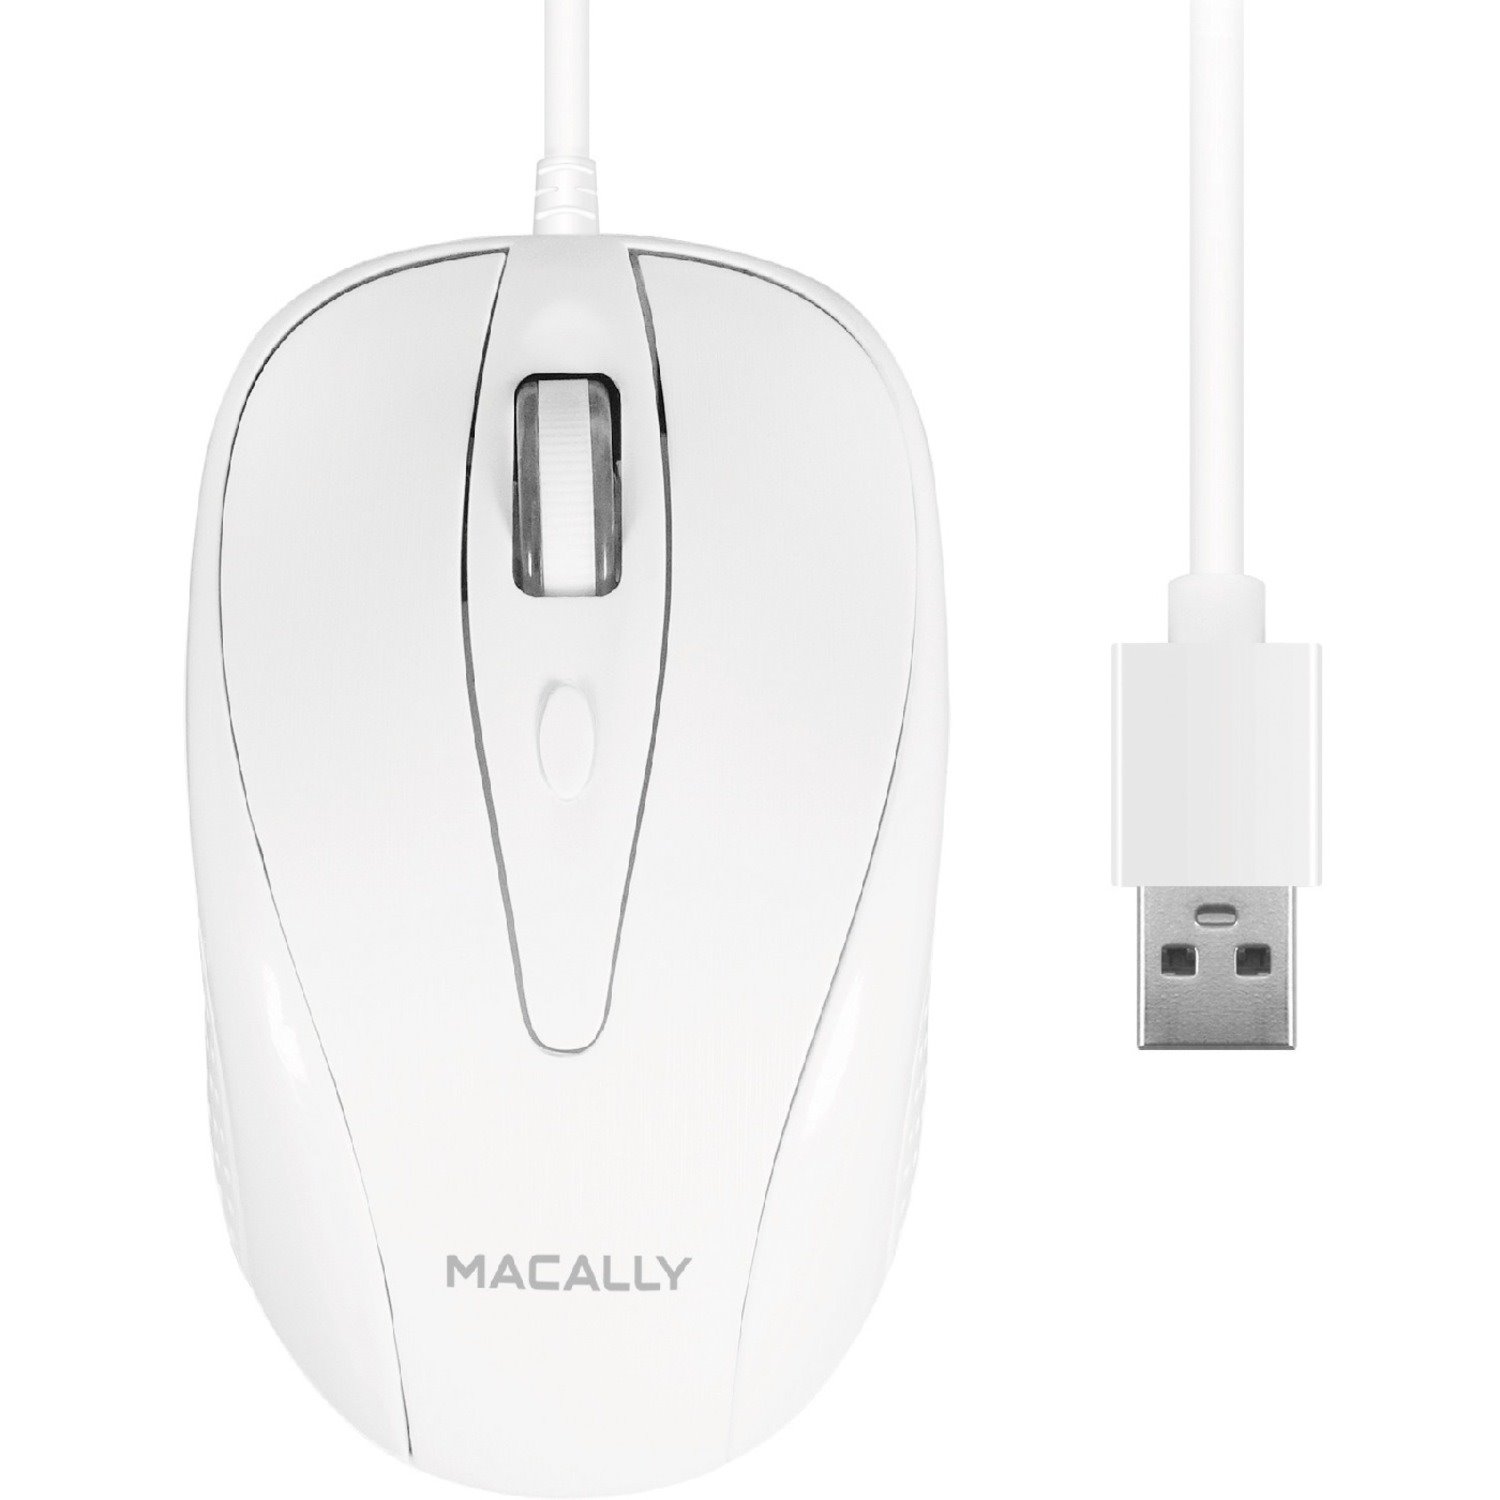 Macally 3 Button Optical USB Wired Mouse for Mac and PC